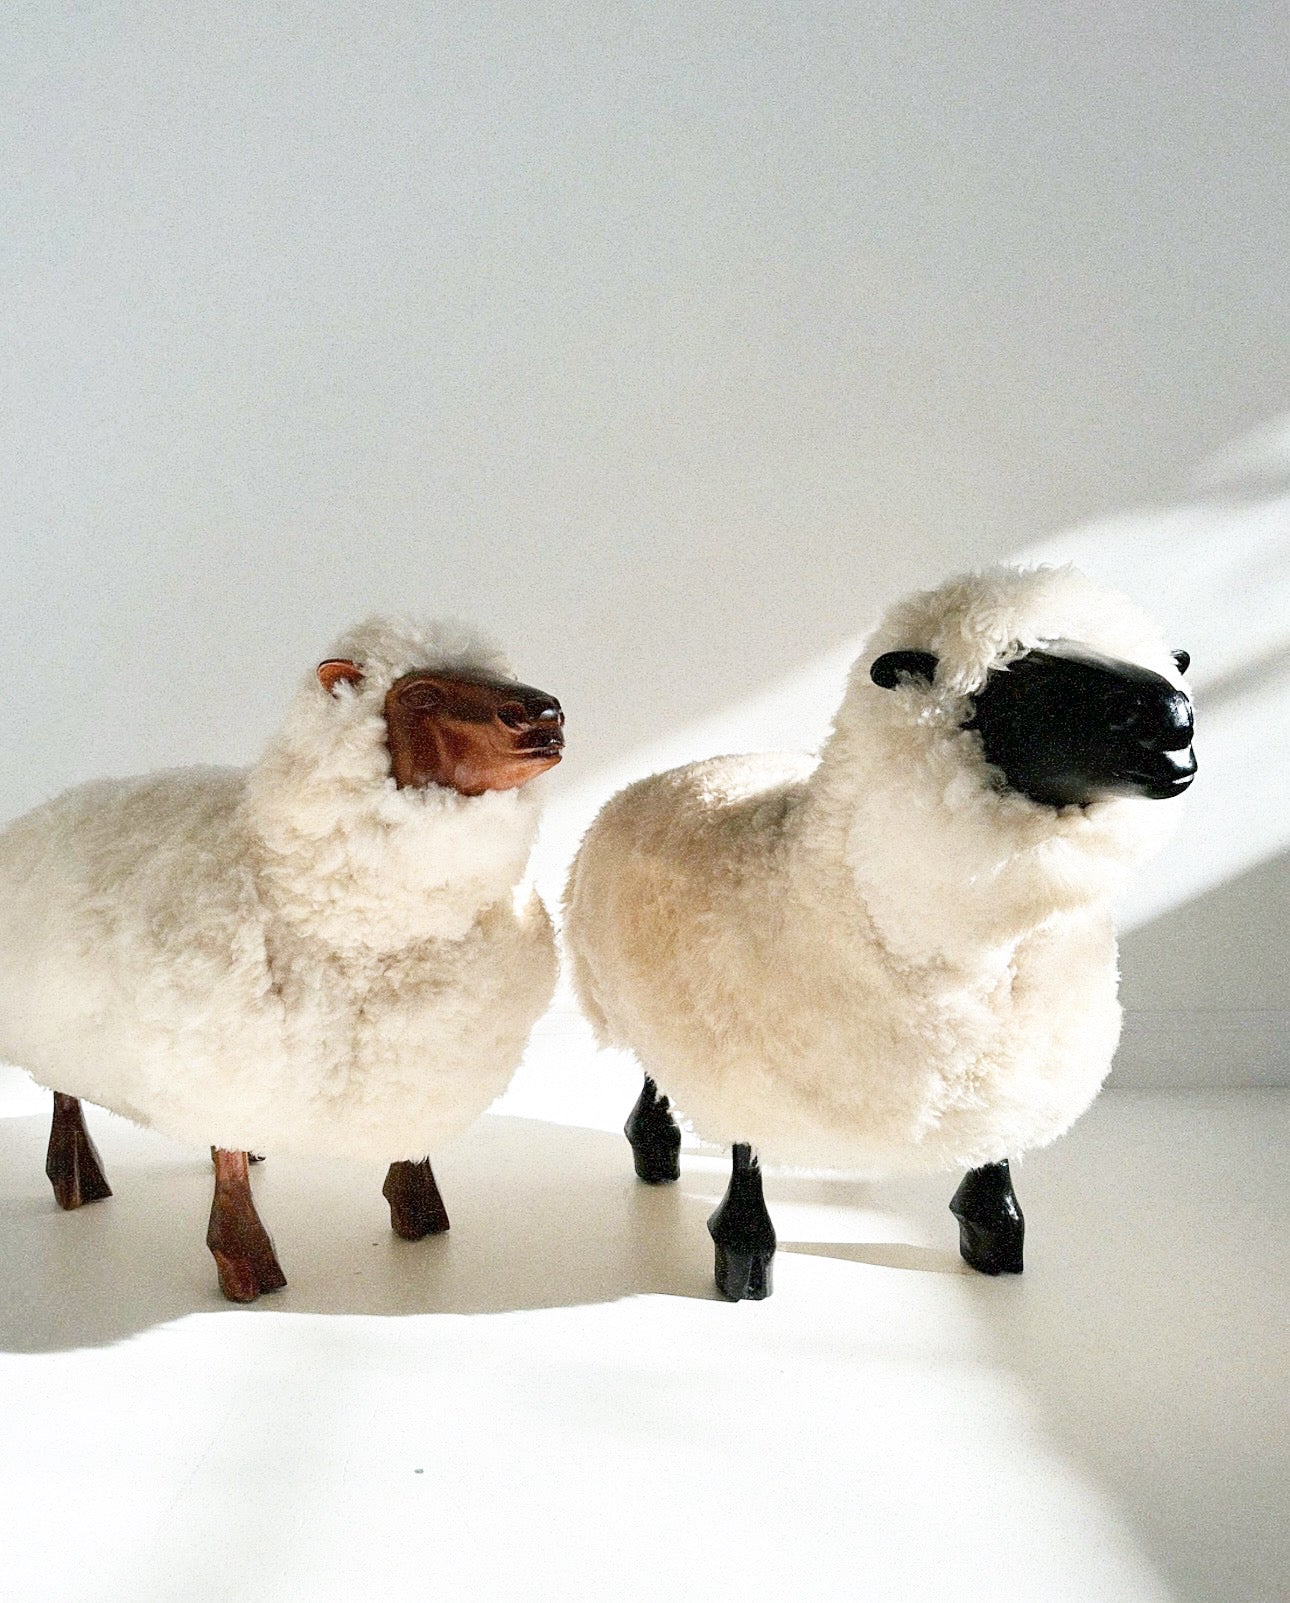 Sheep Sculptures in the Manner of LaLanne